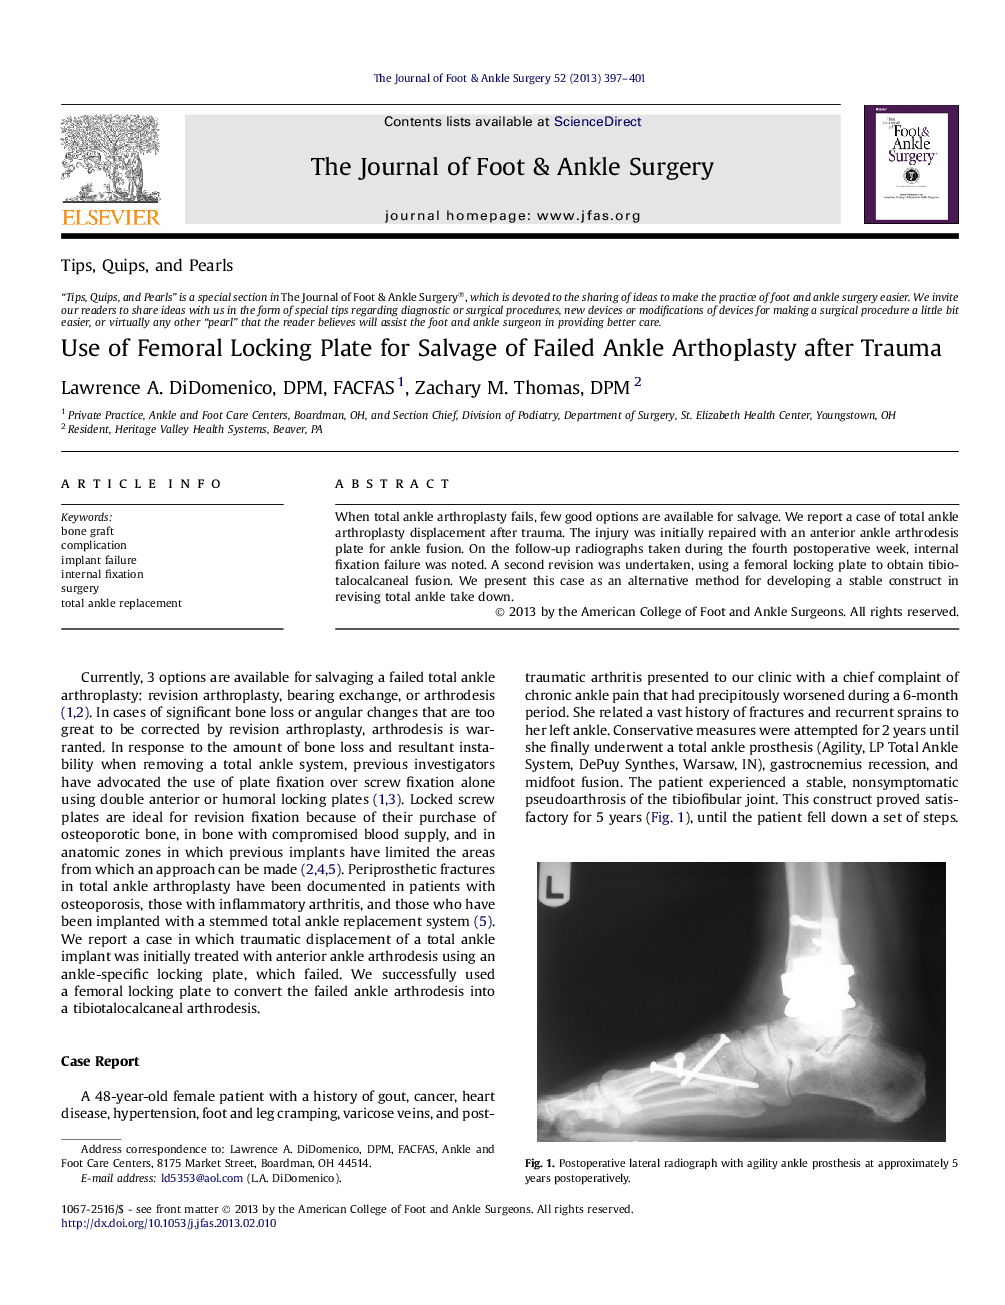 Use of Femoral Locking Plate for Salvage of Failed Ankle Arthoplasty after Trauma